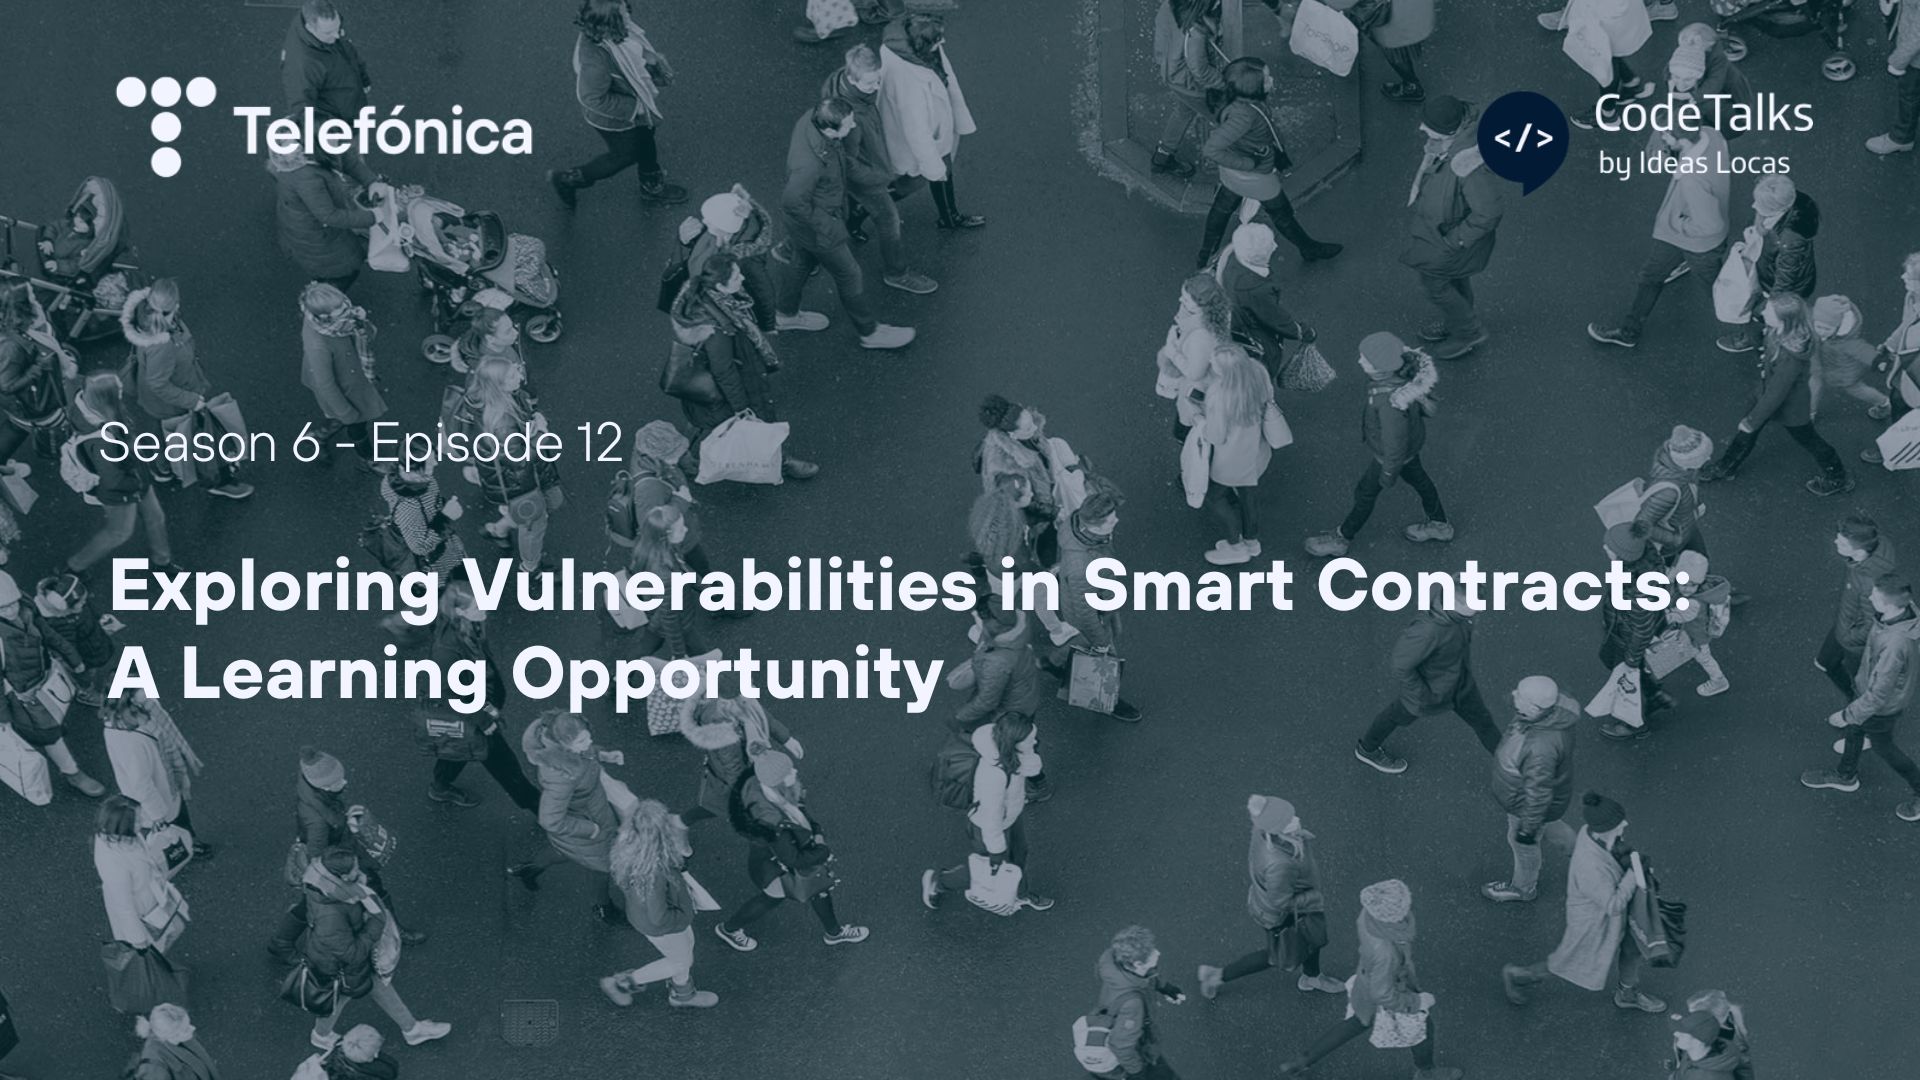 Exploring vulnerabilities in Smart Contracts: A Learning Opportunity